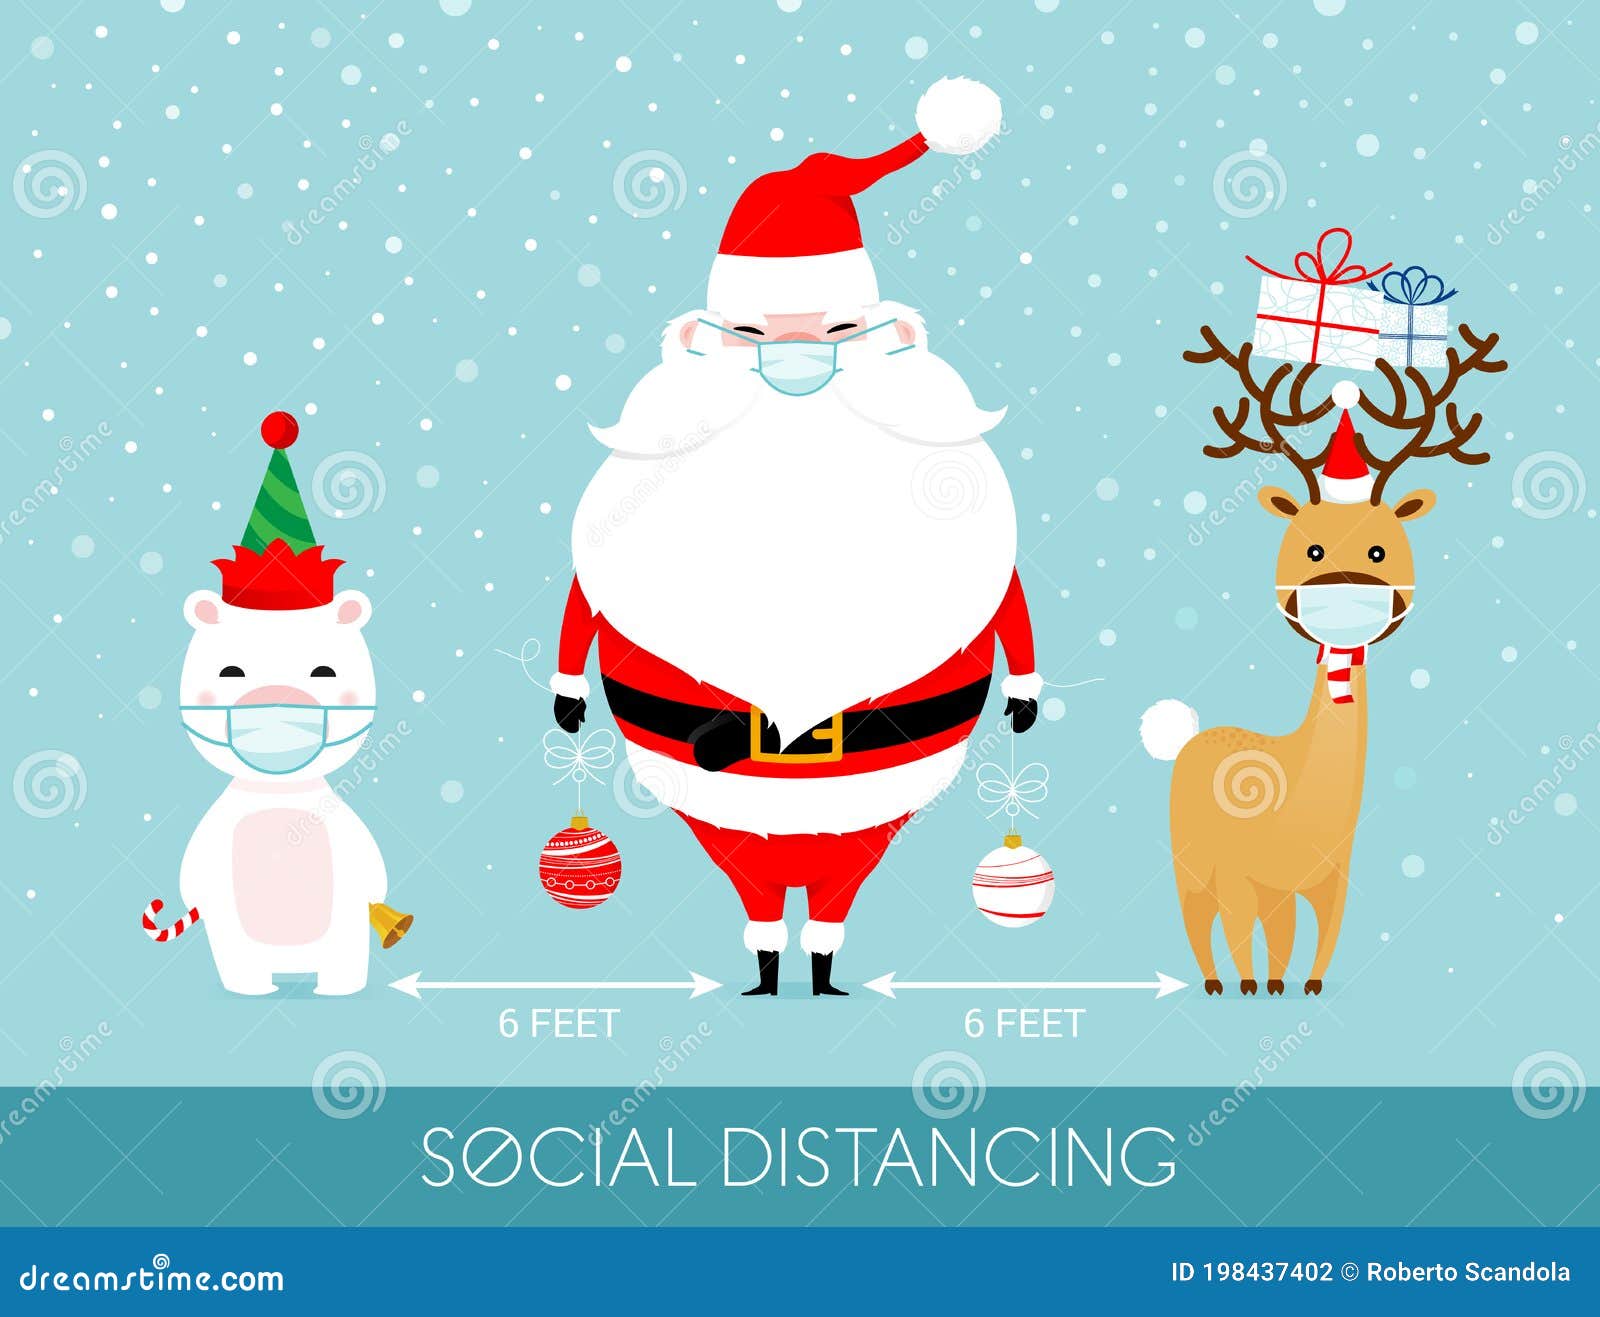 Covid 19 And Social Distancing Infographic With Cute Christmas Cartoon Character Stock Vector Illustration Of Flat Cartoon 198437402